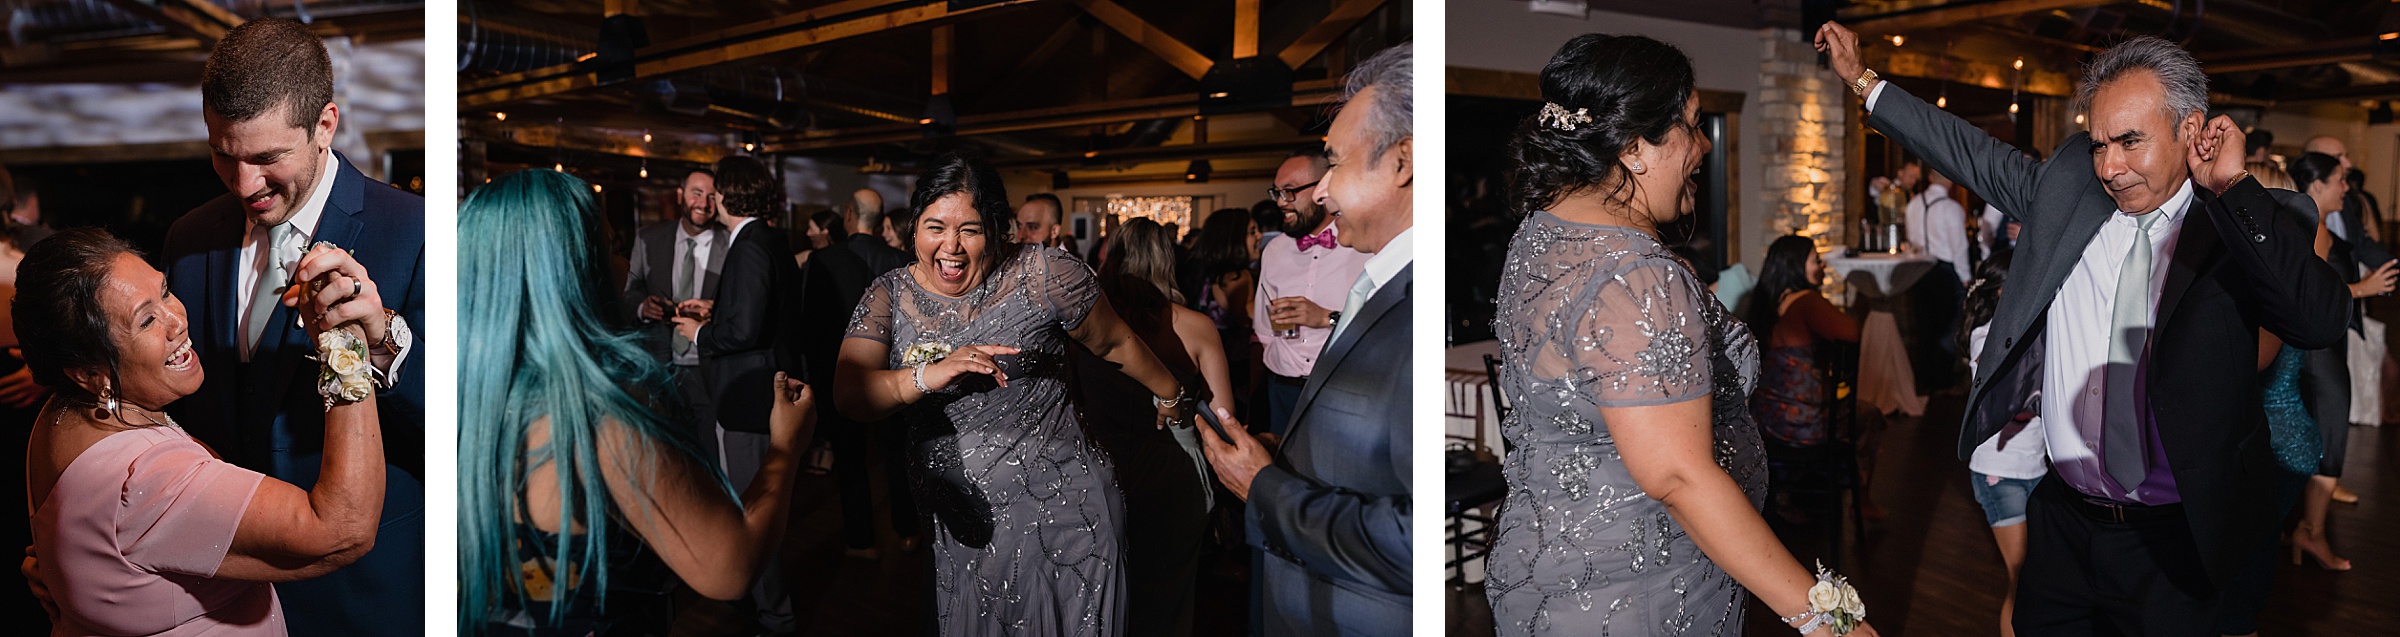 Family and friends dance during a wedding at the Fisherman's Inn in Elburn, Illinois.